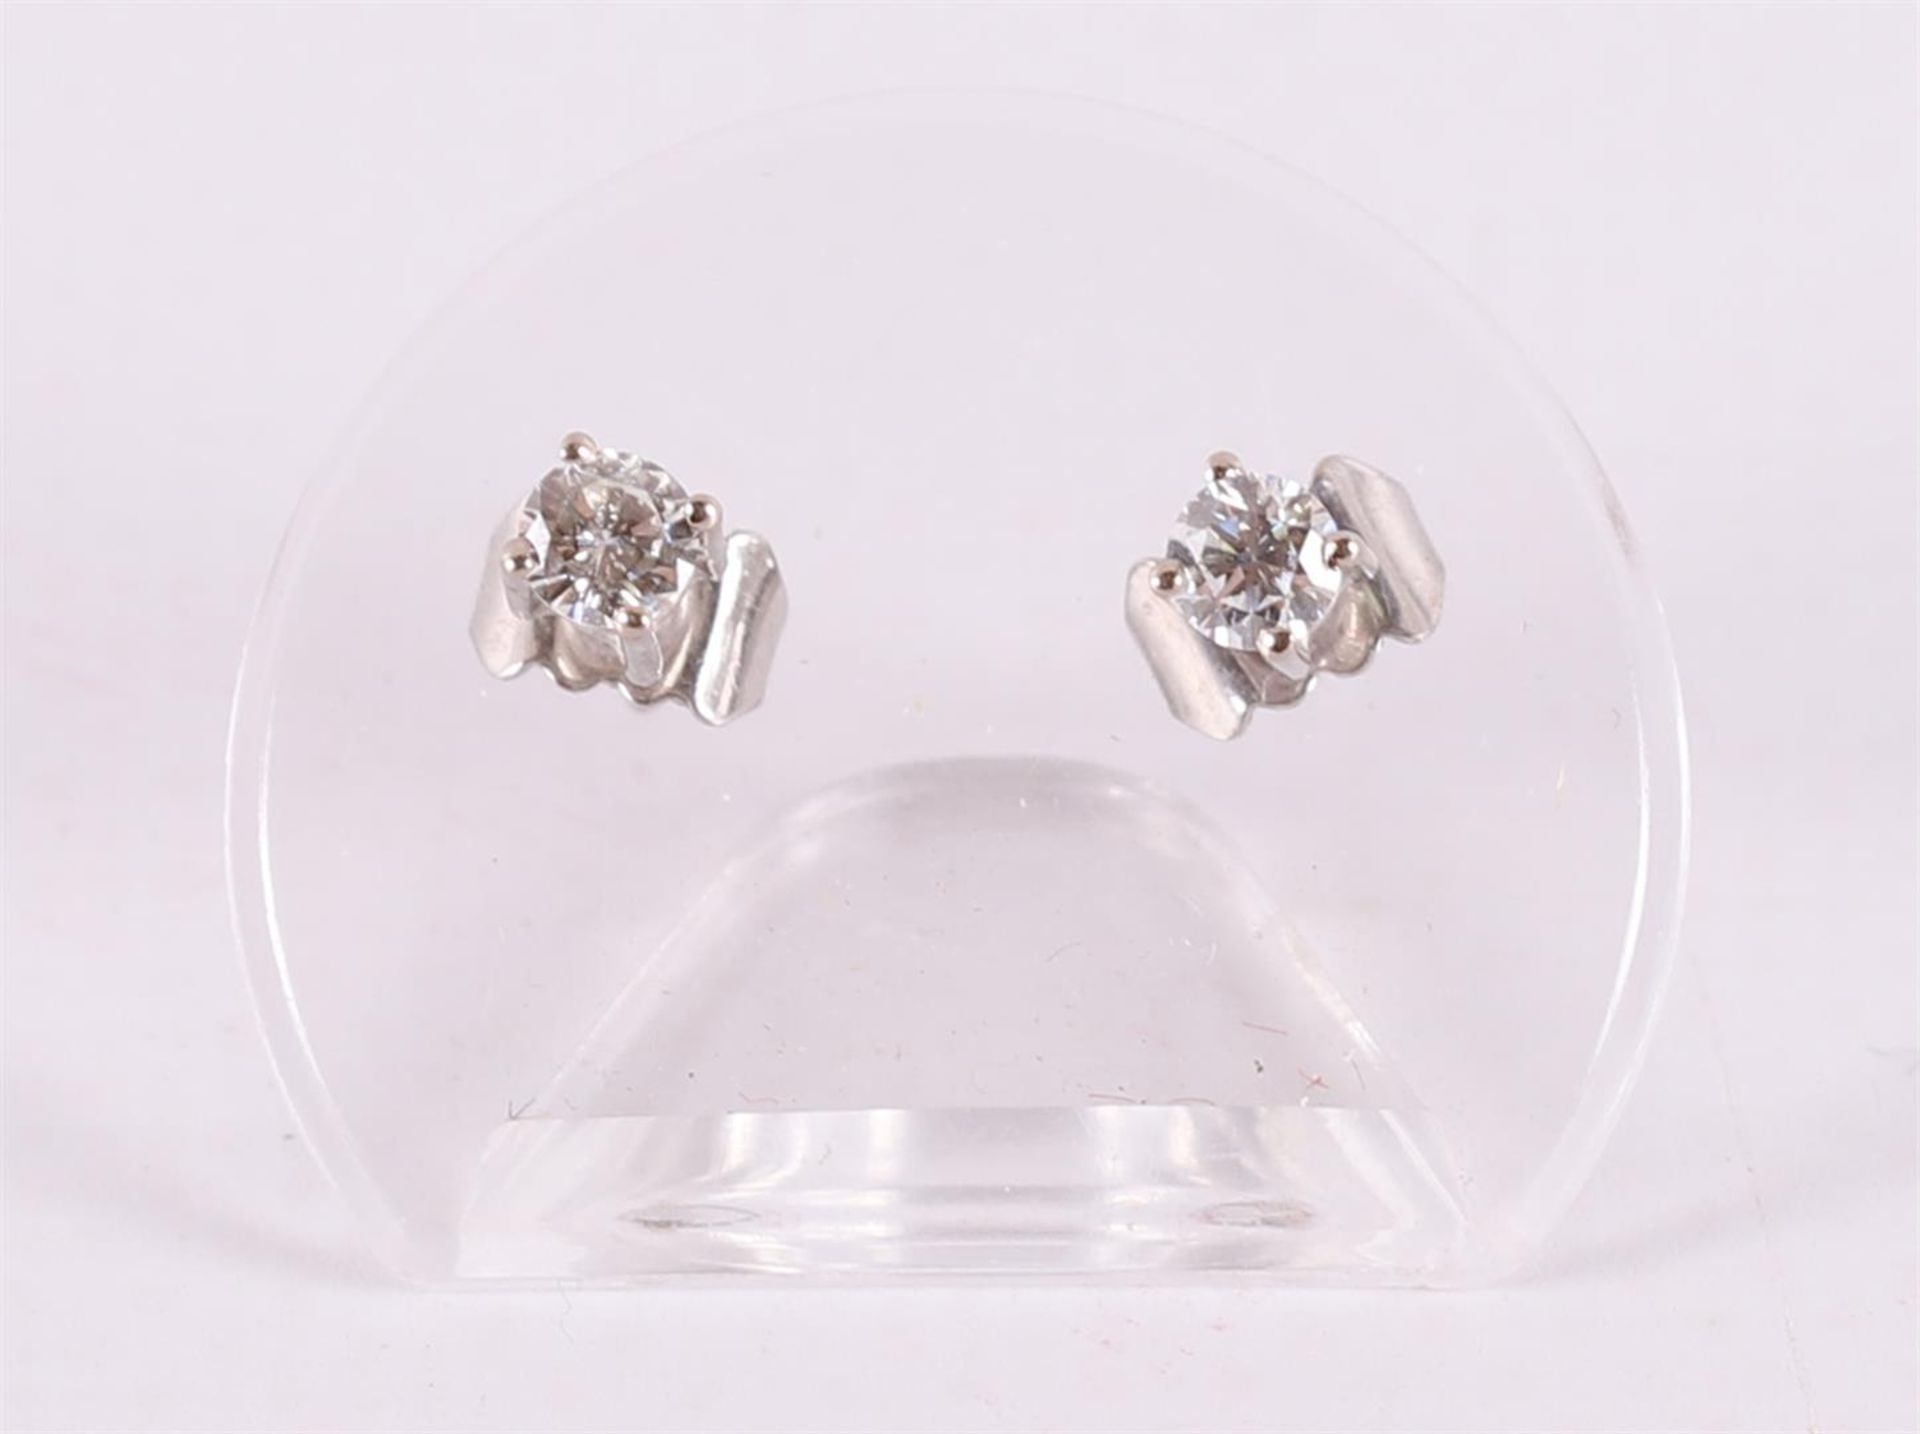 A pair of 18 kt white gold stud earrings with 2 diamonds of 0.17 crt H-VS each.